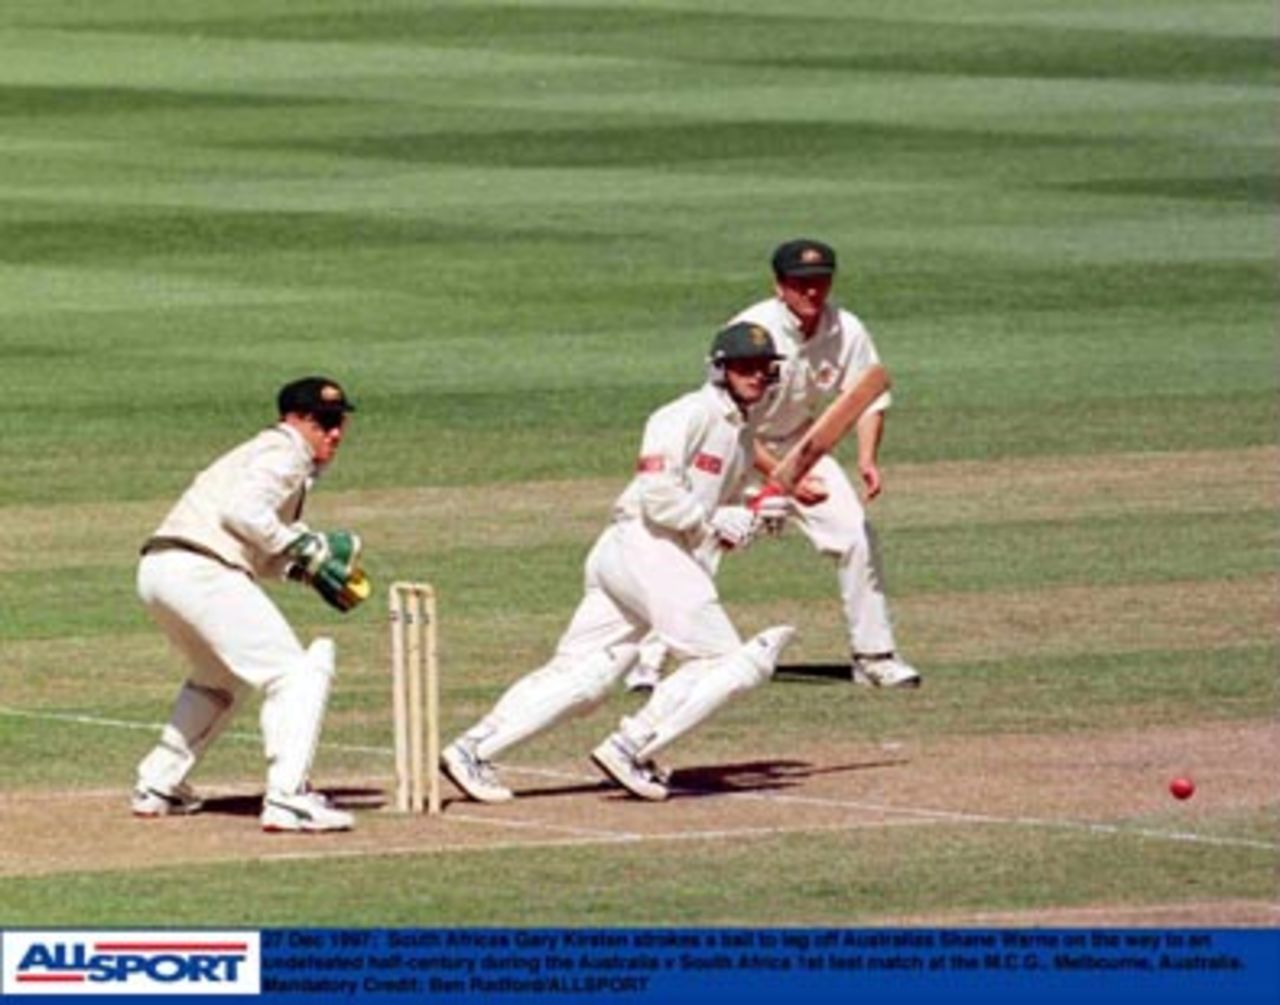 South African Gary Kirsten strokes a ball to leg off Australia's Shane Warne on the way to an undefeated half-century during the Australia v South Africa 1st Test match at the M.C.G., Melbourne, Australia. December 27th 1997.